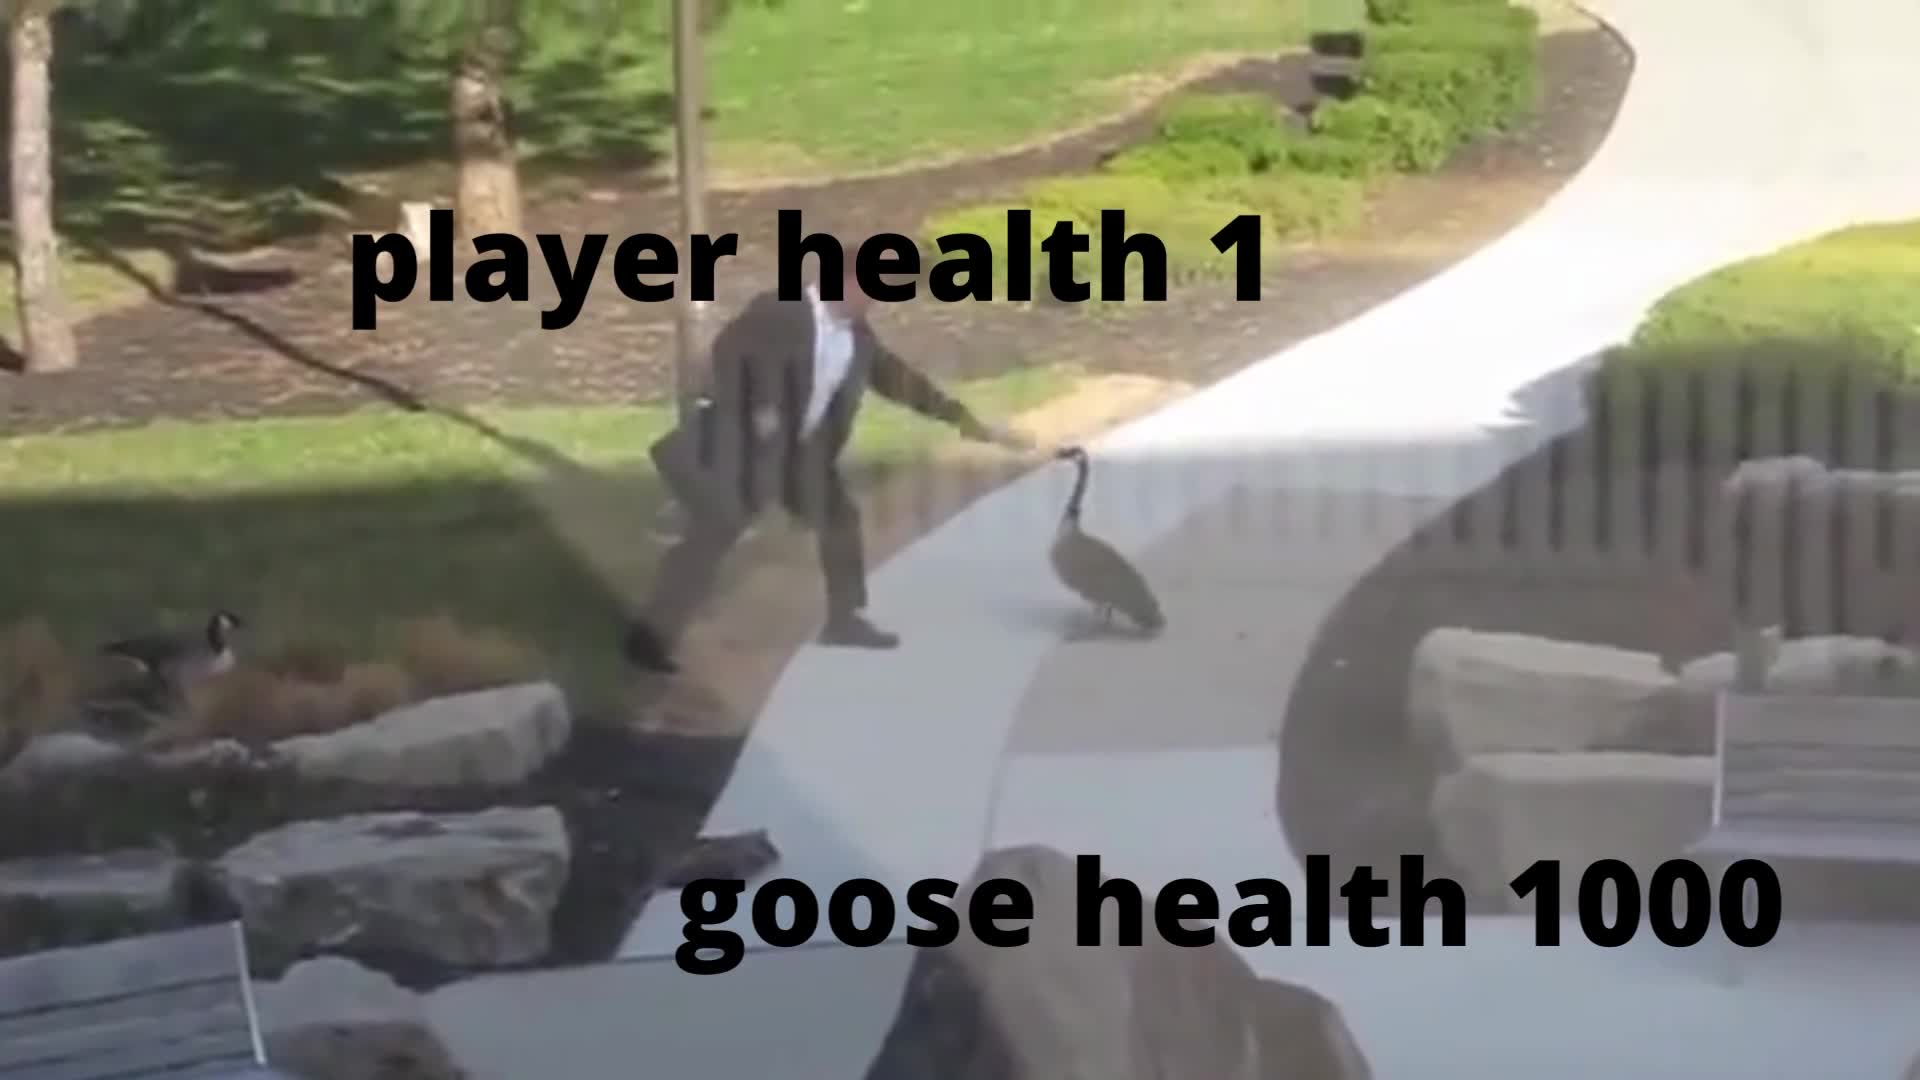 guy got fucked by a goose